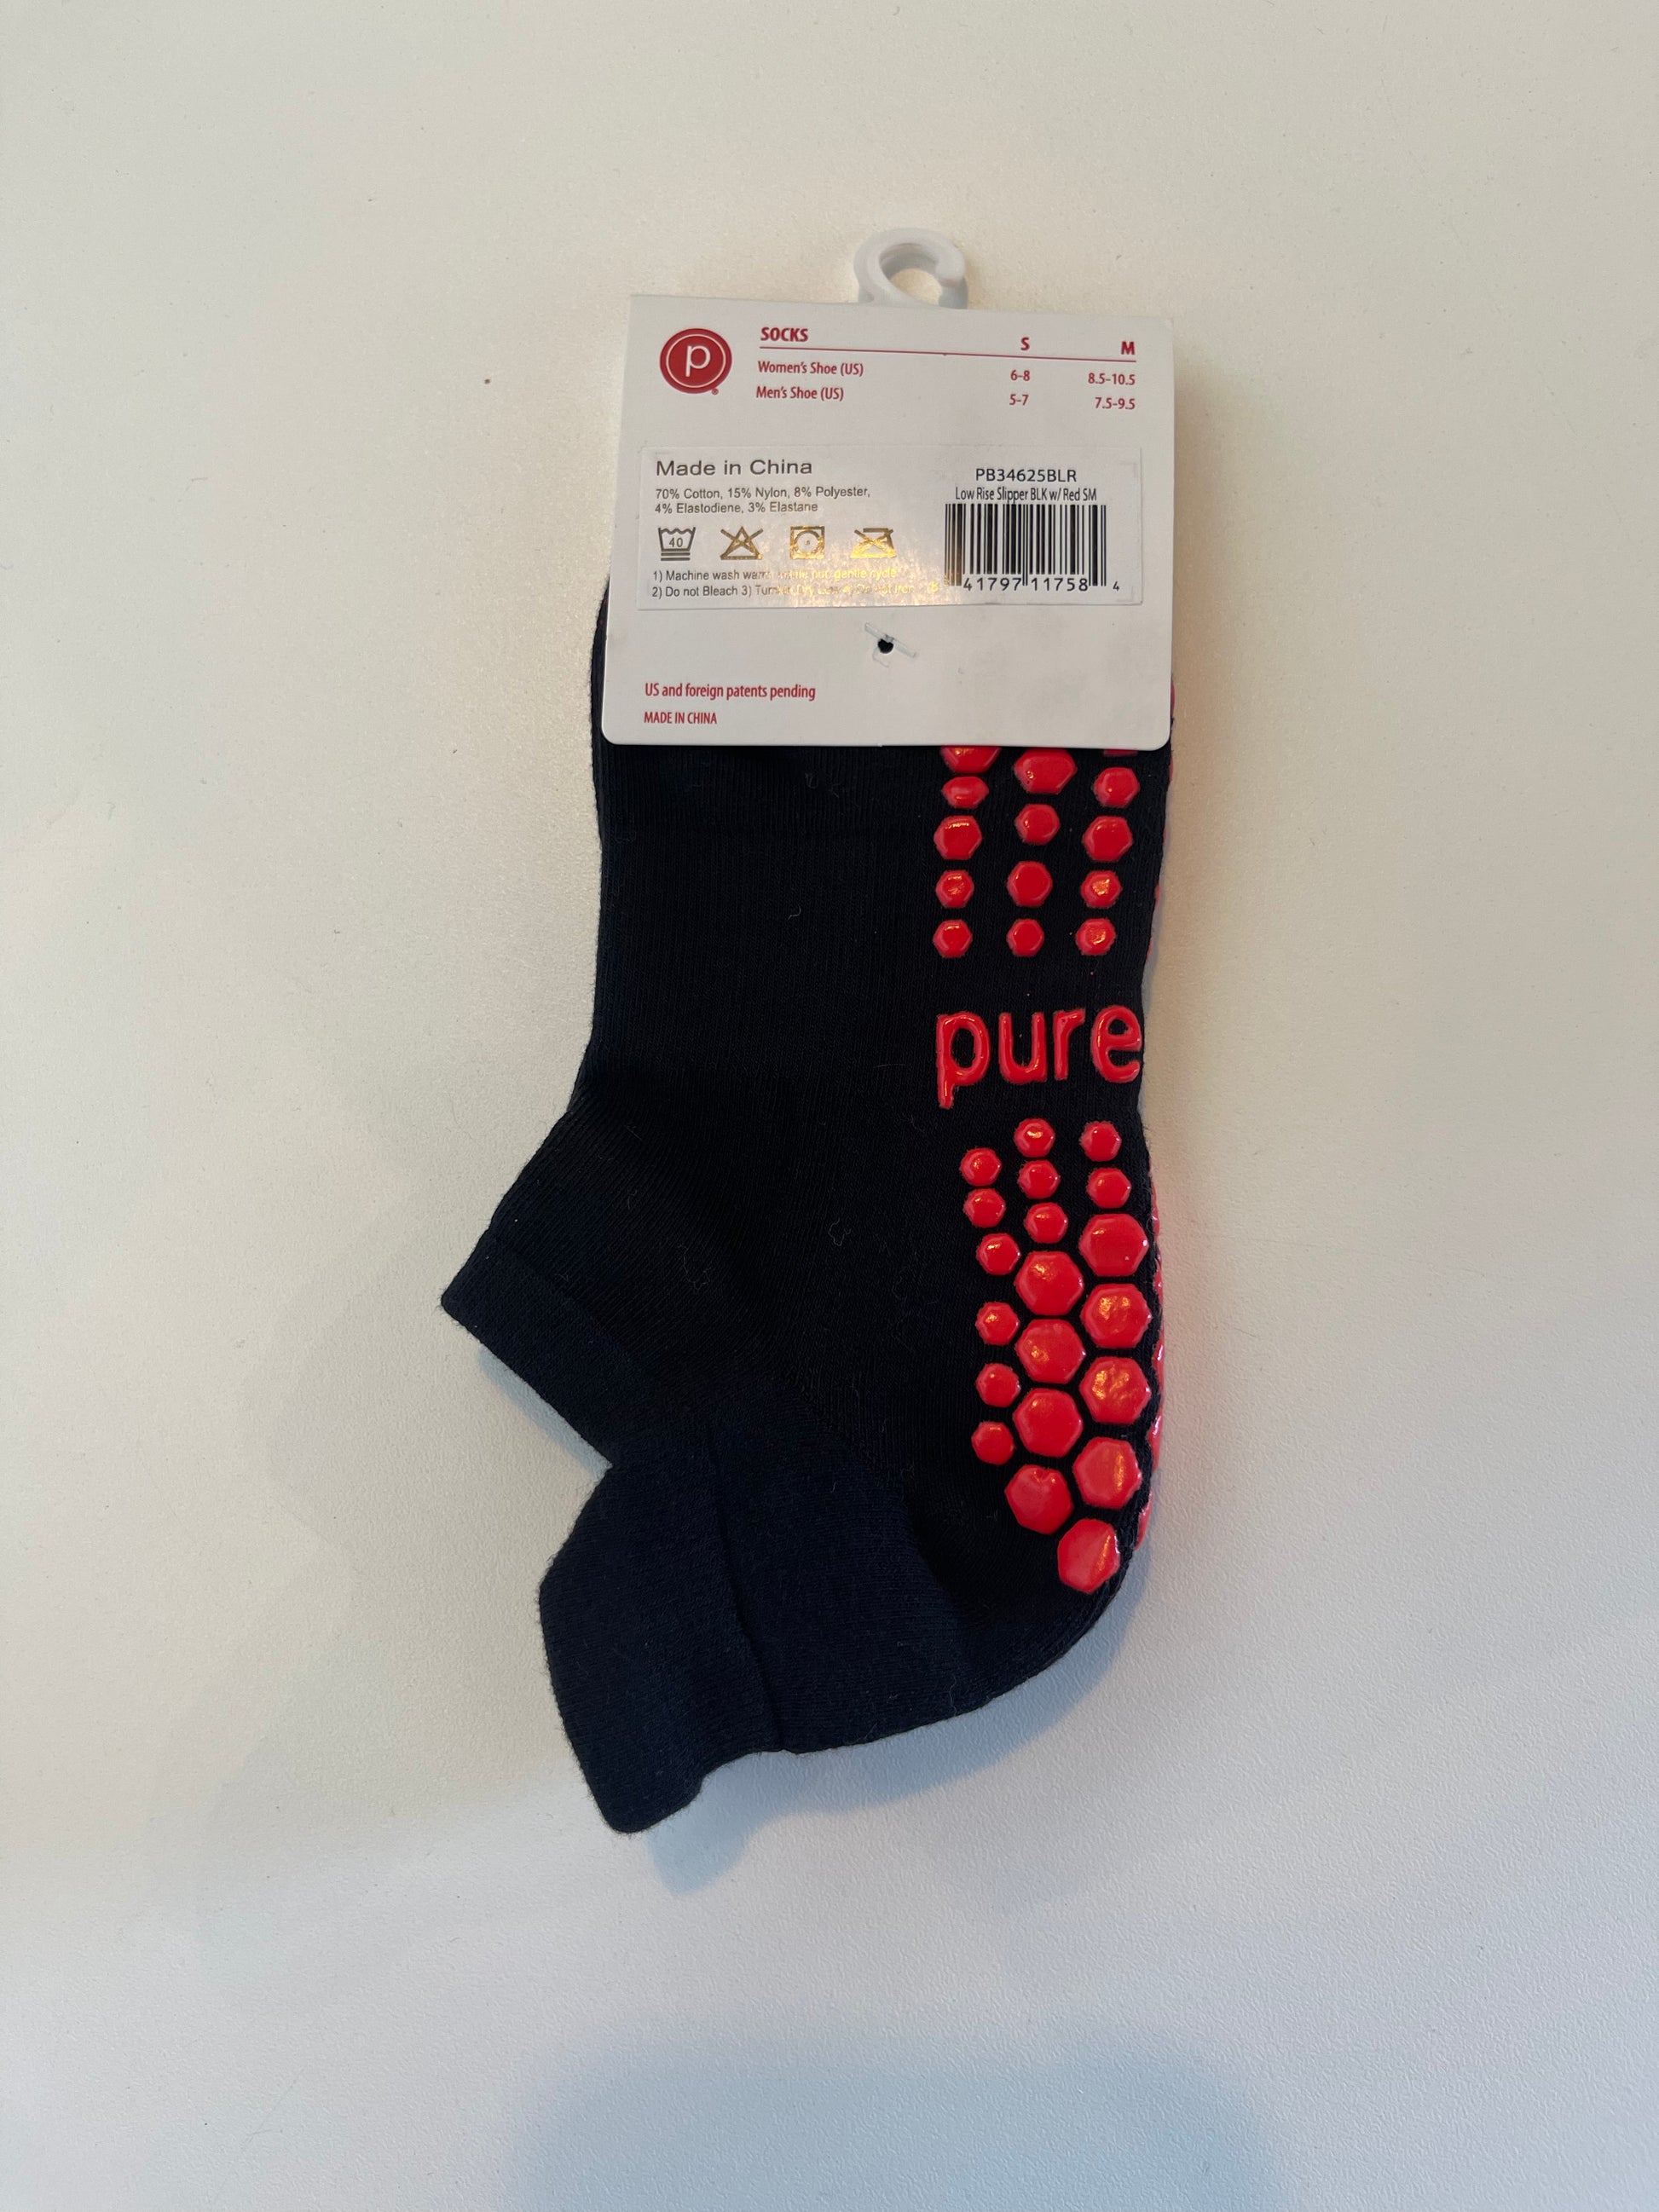 Pure Barre - New sticky socks are in! The best feeling when you